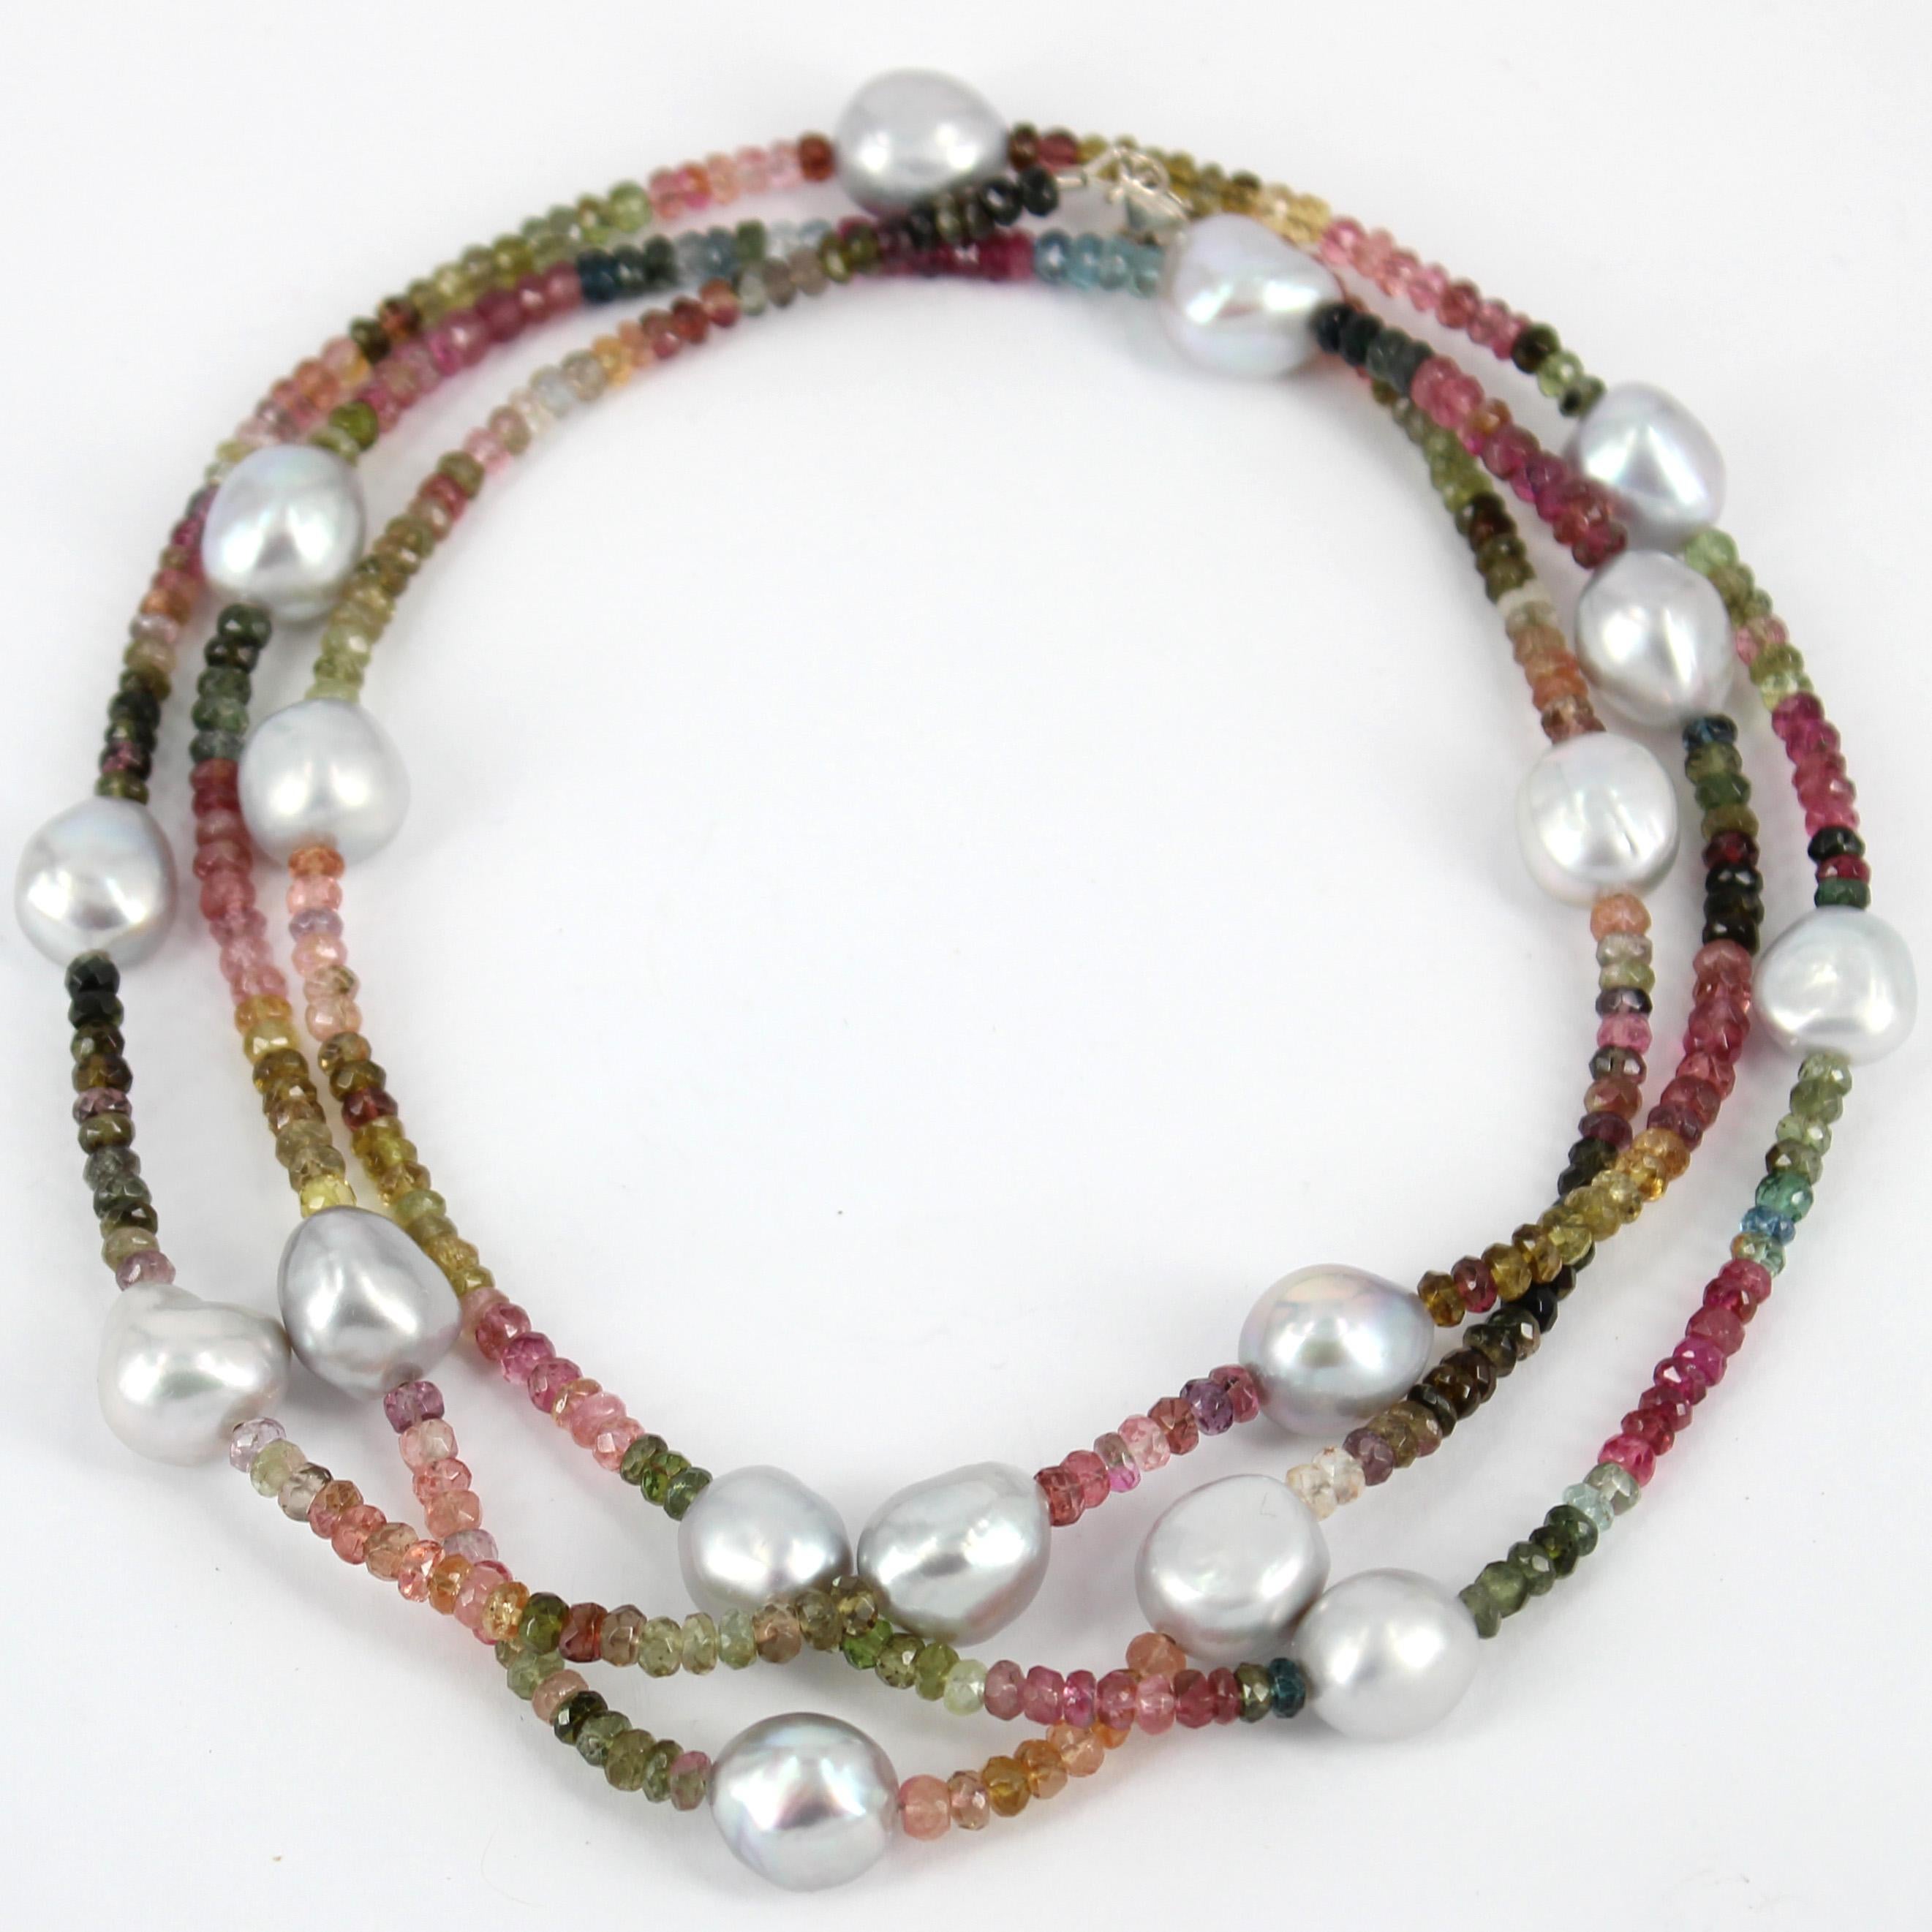 Out in a hurry just throw this simple necklace on and look elegant, you can wear it as a single strand or wrap it around your neck for a double layer effect, this Faceted Tourmaline, is complemented with Lite Grey Fresh Water Pearls, finished with